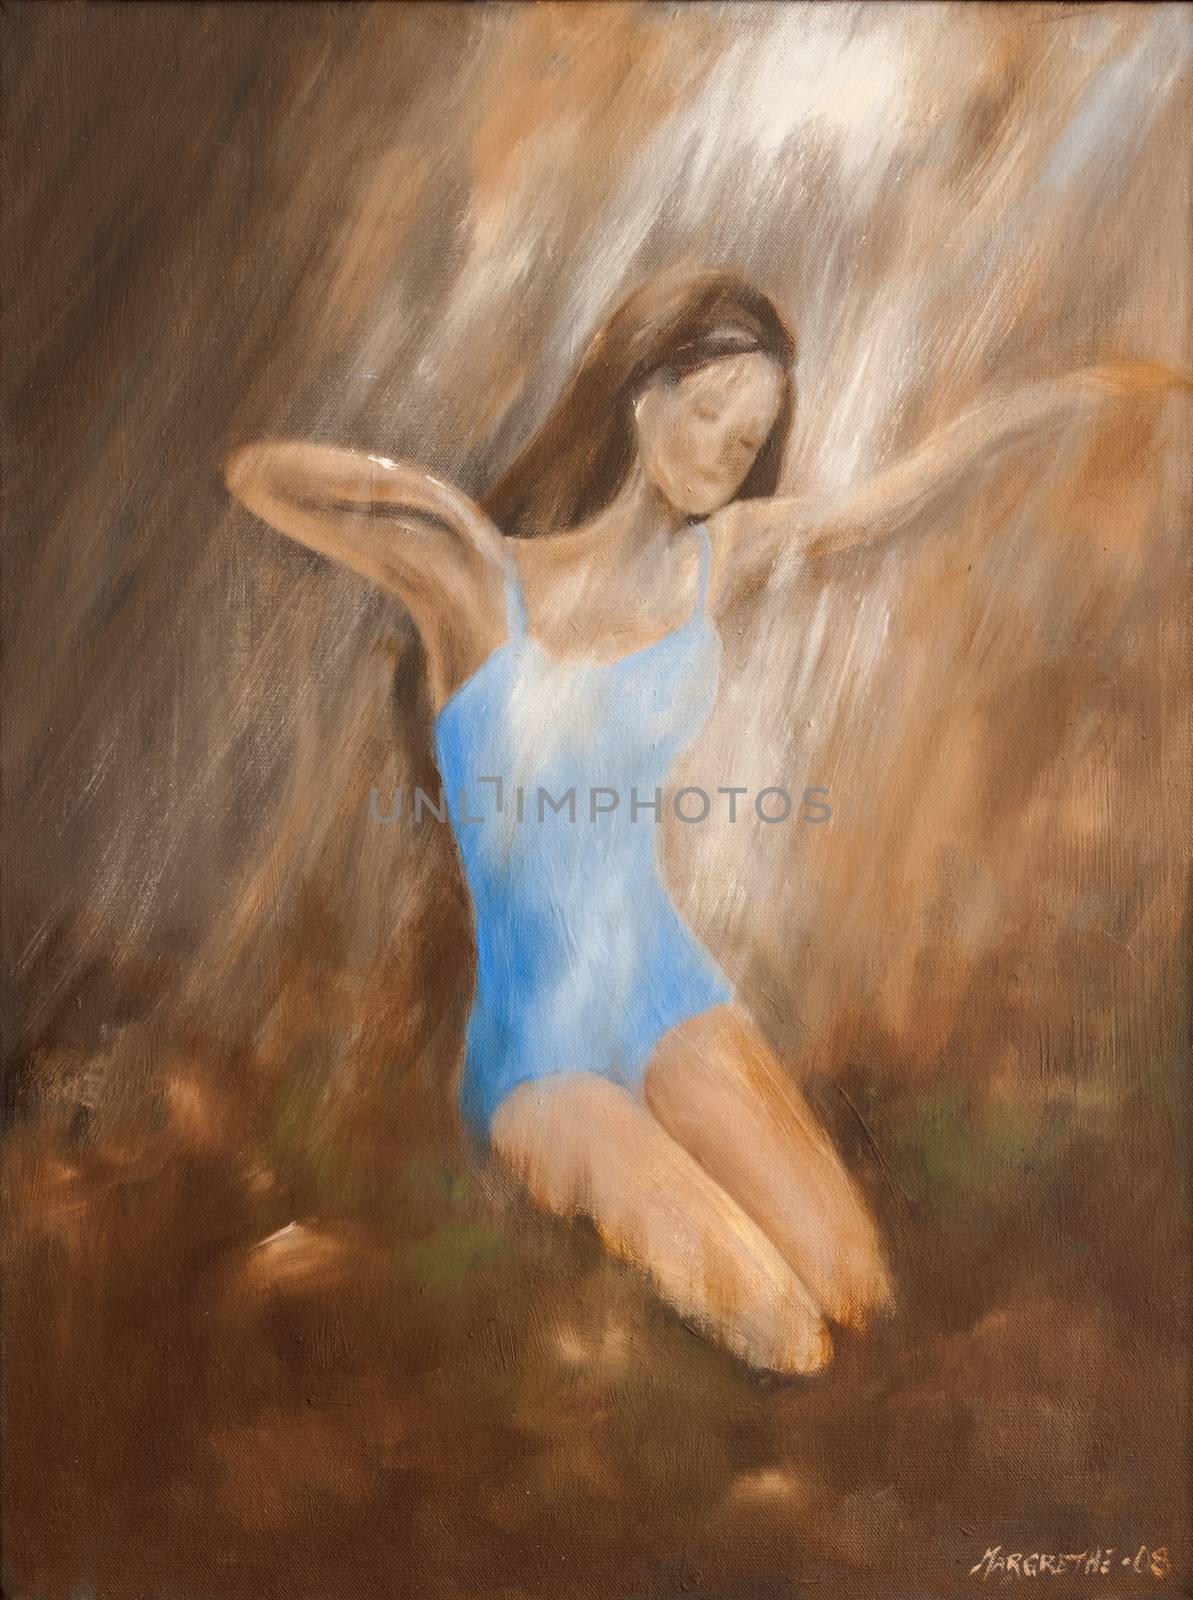 A beach scenery with a young woman in blue bathing suit sunbathing woman. A girl is stretching in the light. Oil painting on canvas. Summer landscape. Painted figurative art with oil on canvas.